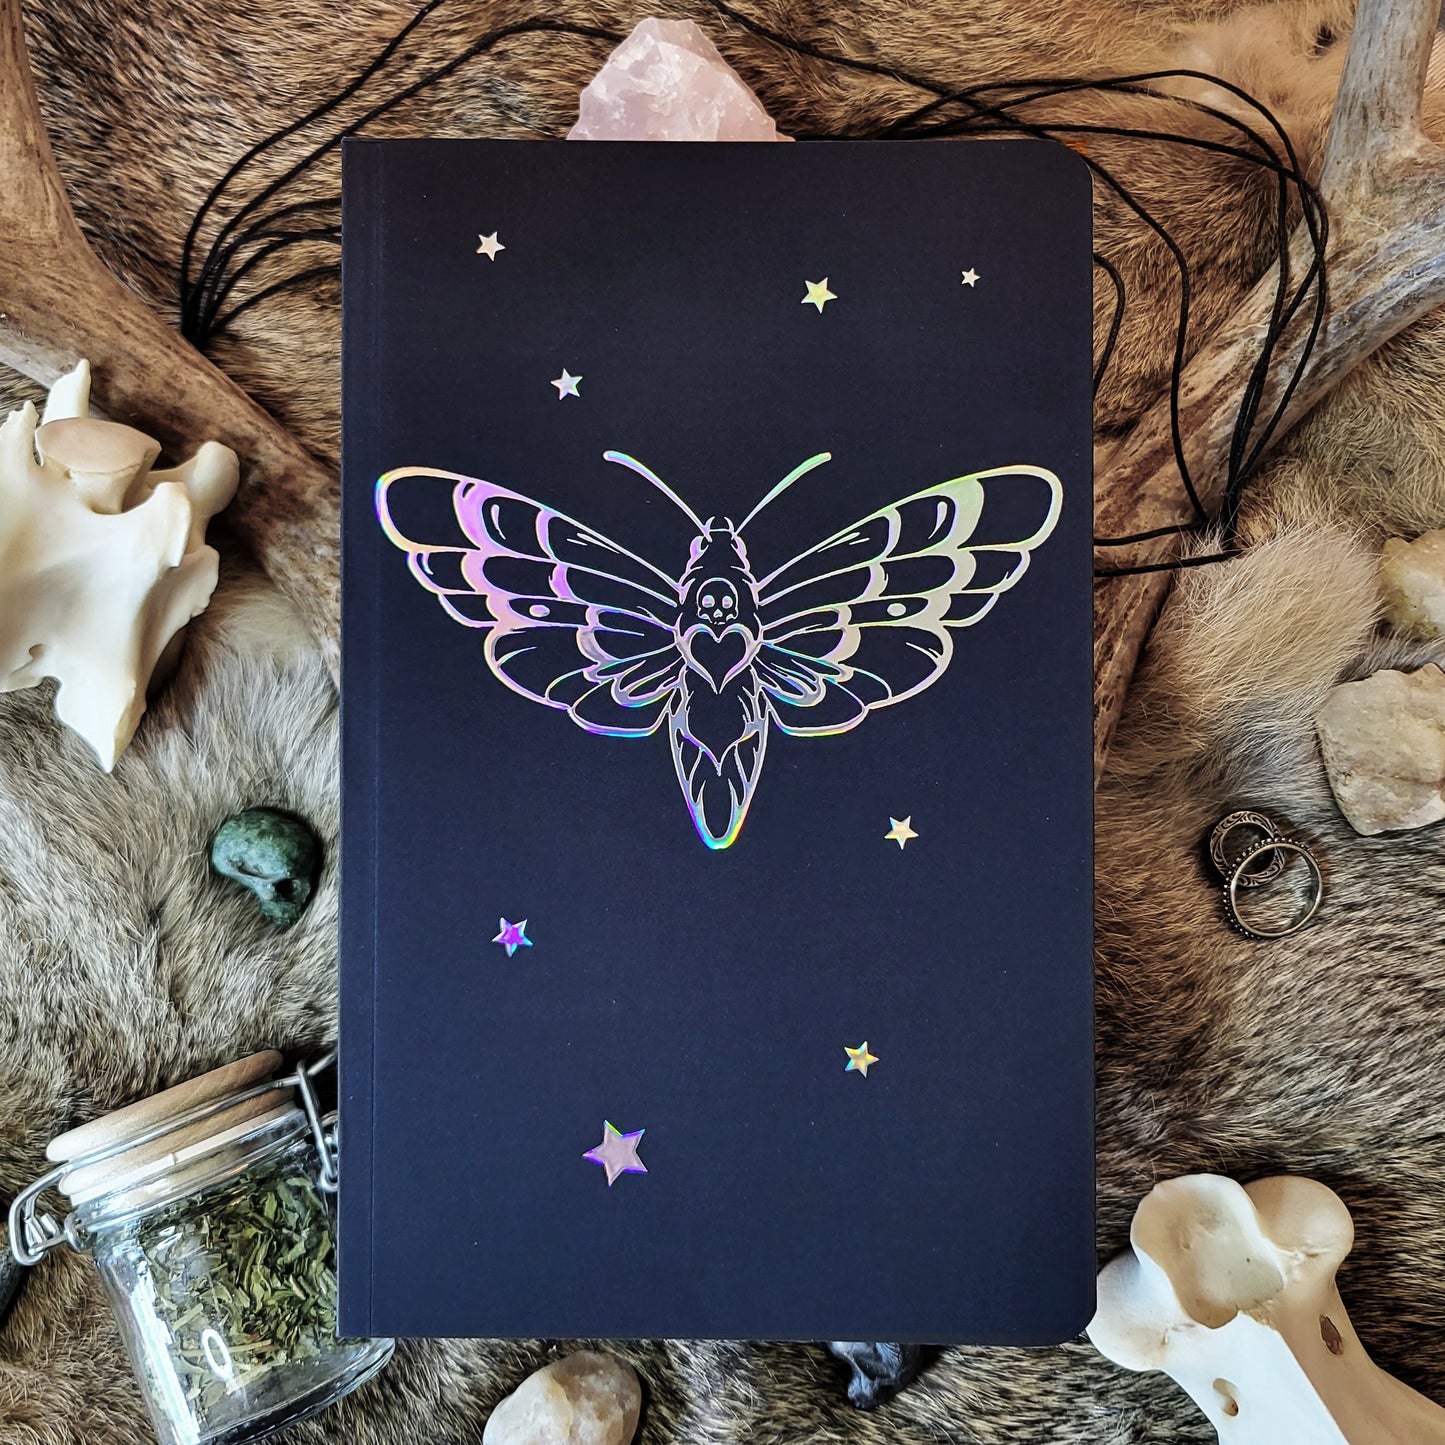 Death's Head Hawkmoth Iridescent Foil Stamped Lay Flat Journal/Sketchbook